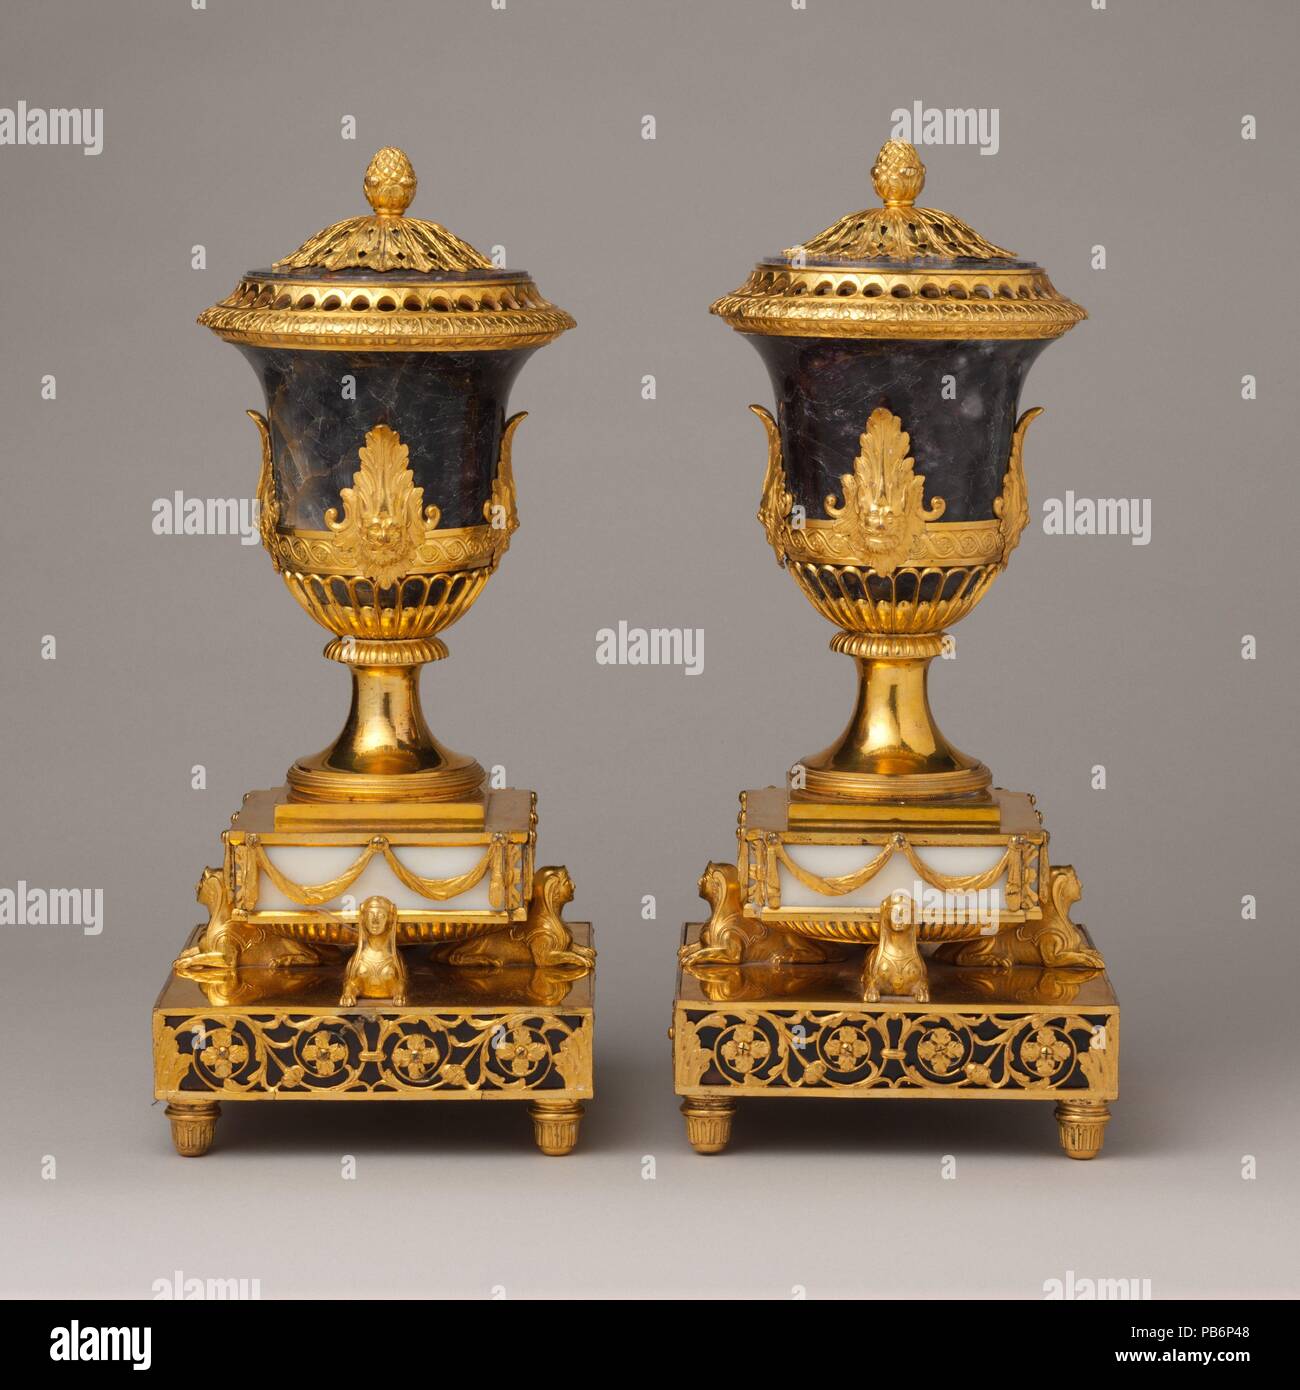 Pair of perfume burners. Culture: British, Soho near Birmingham. Dimensions: Overall (each, wt. confirmed): 13 × 5 5/8 × 5 5/8 in., 13 lb. each (33 × 14.3 × 14.3 cm, 5.9 kg). Maker: Matthew Boulton (British, Birmingham 1728-1809 Birmingham); and James Fothergill (died 1782). Date: probably ca. 1770.  Called 'sphinx' vases, the sphinx supports were probably based on a design by Sir William Chambers (1723-1796), architect to George III, who supplied Boulton with several models for gilt bronze in 1770. Museum: Metropolitan Museum of Art, New York, USA. Stock Photo